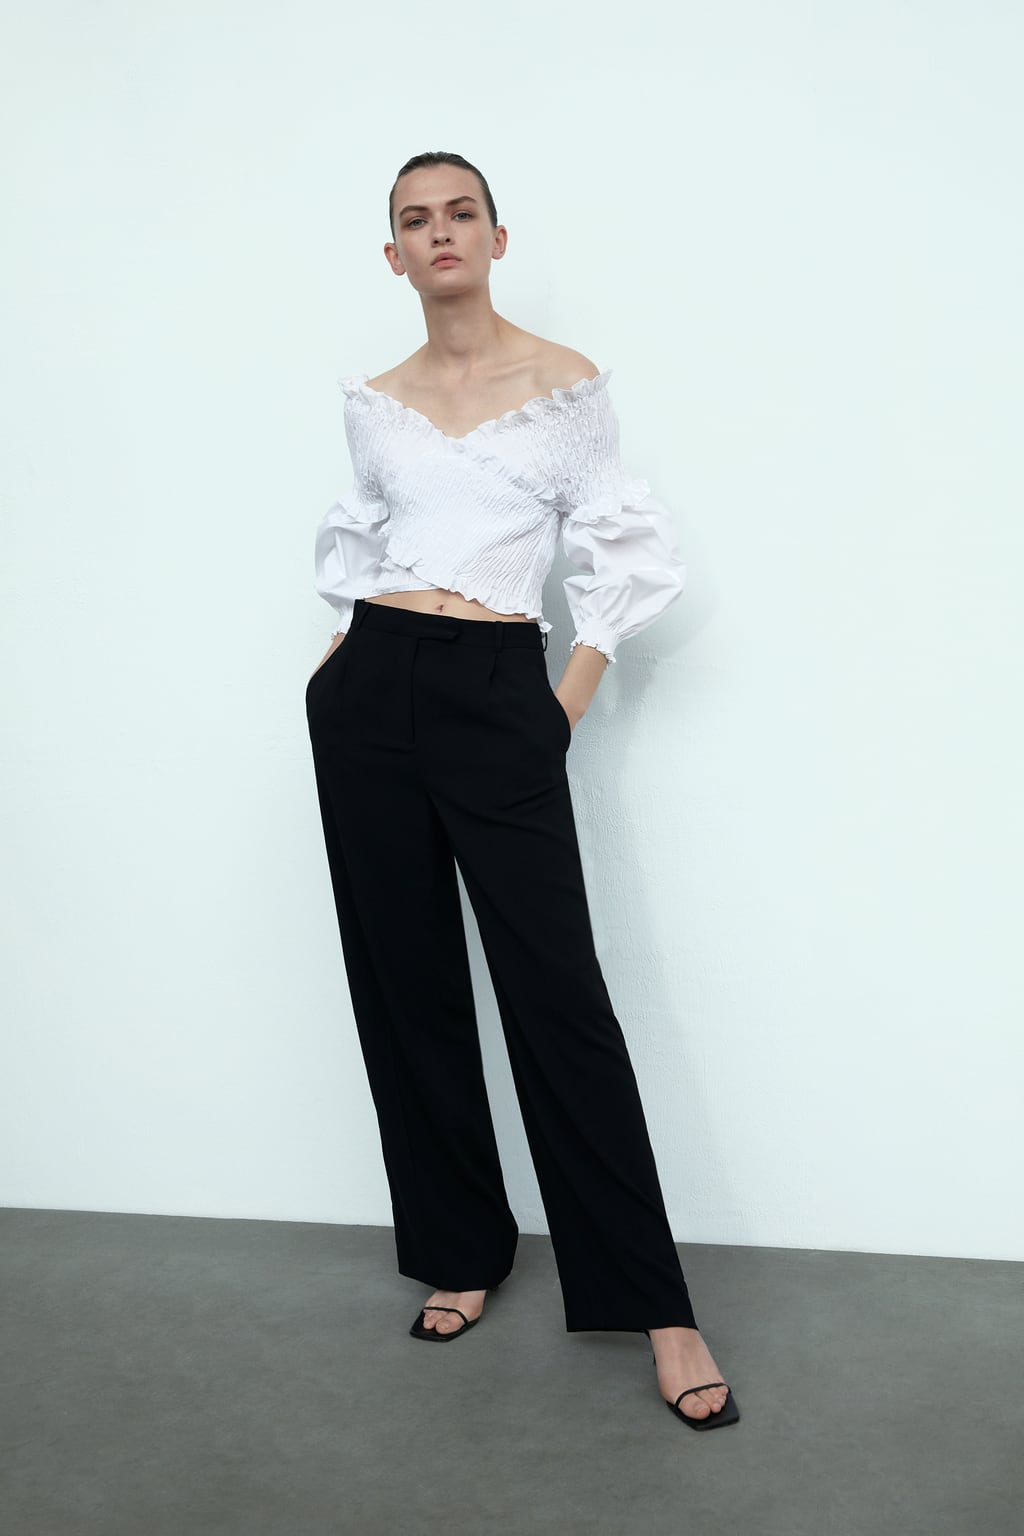 CROPPED TOP WITH ELASTIC DETAIL
